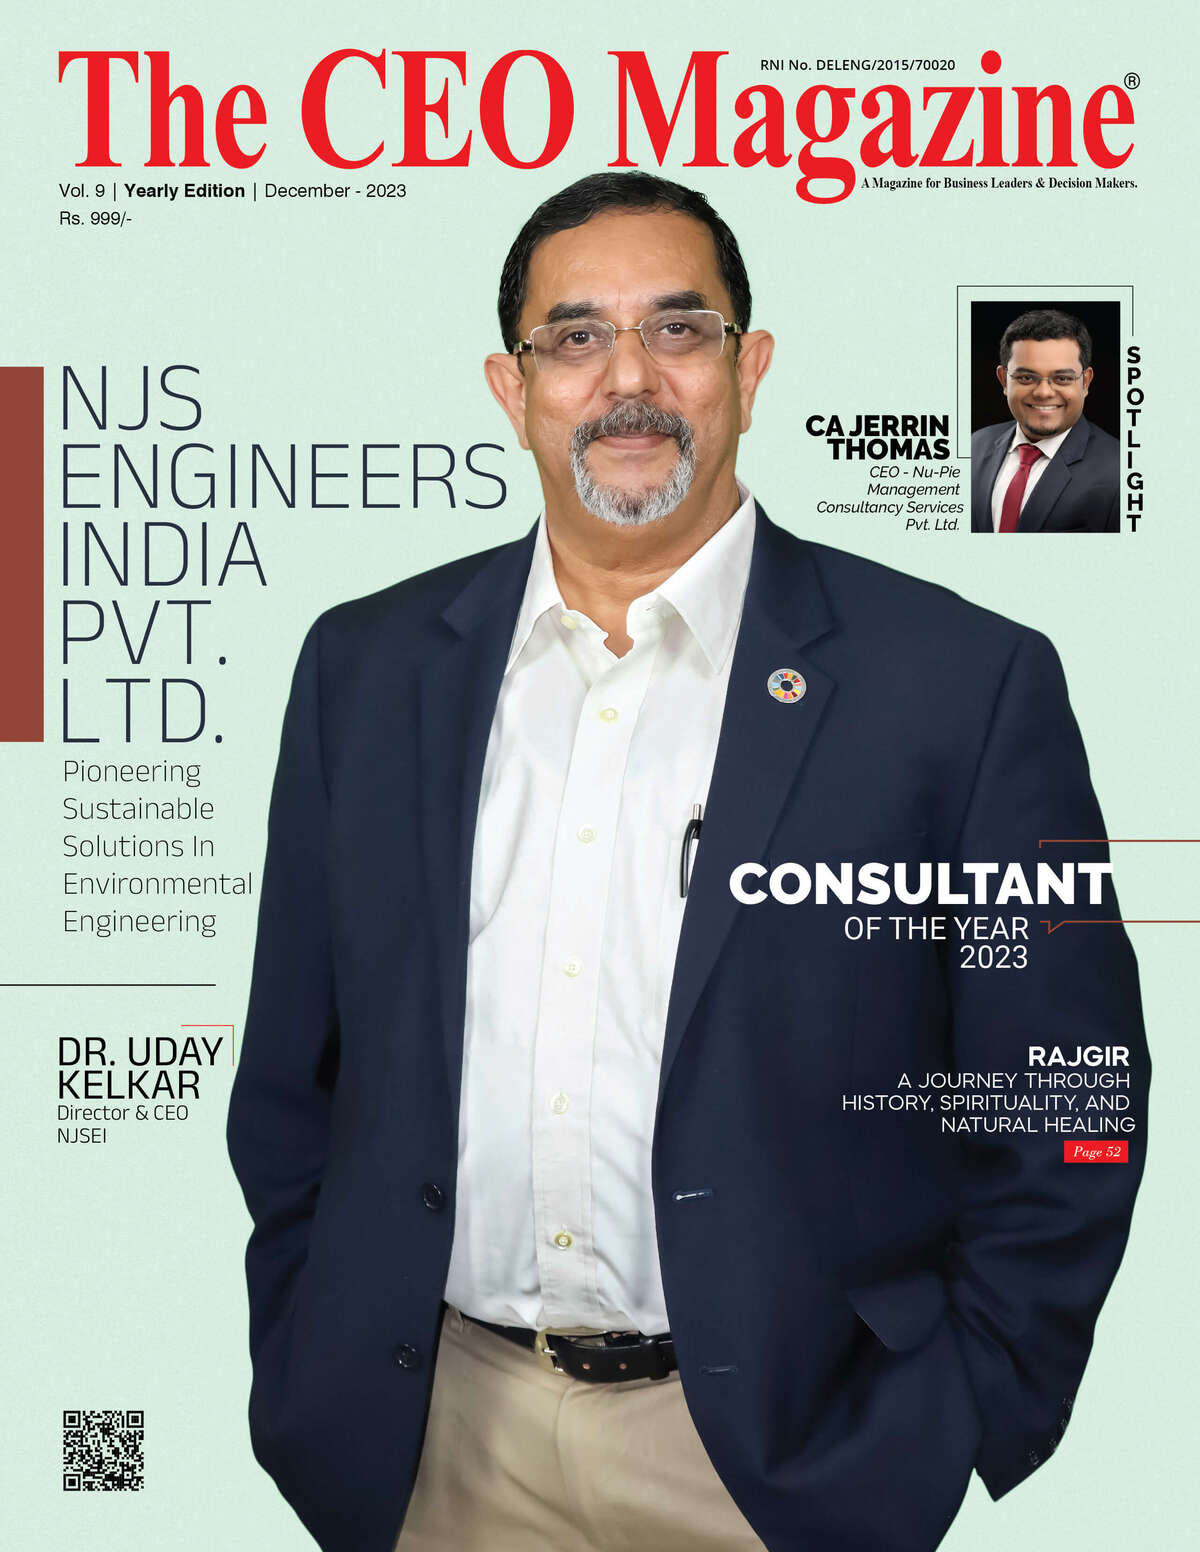 The CEO Magazine – NJS Engineers India